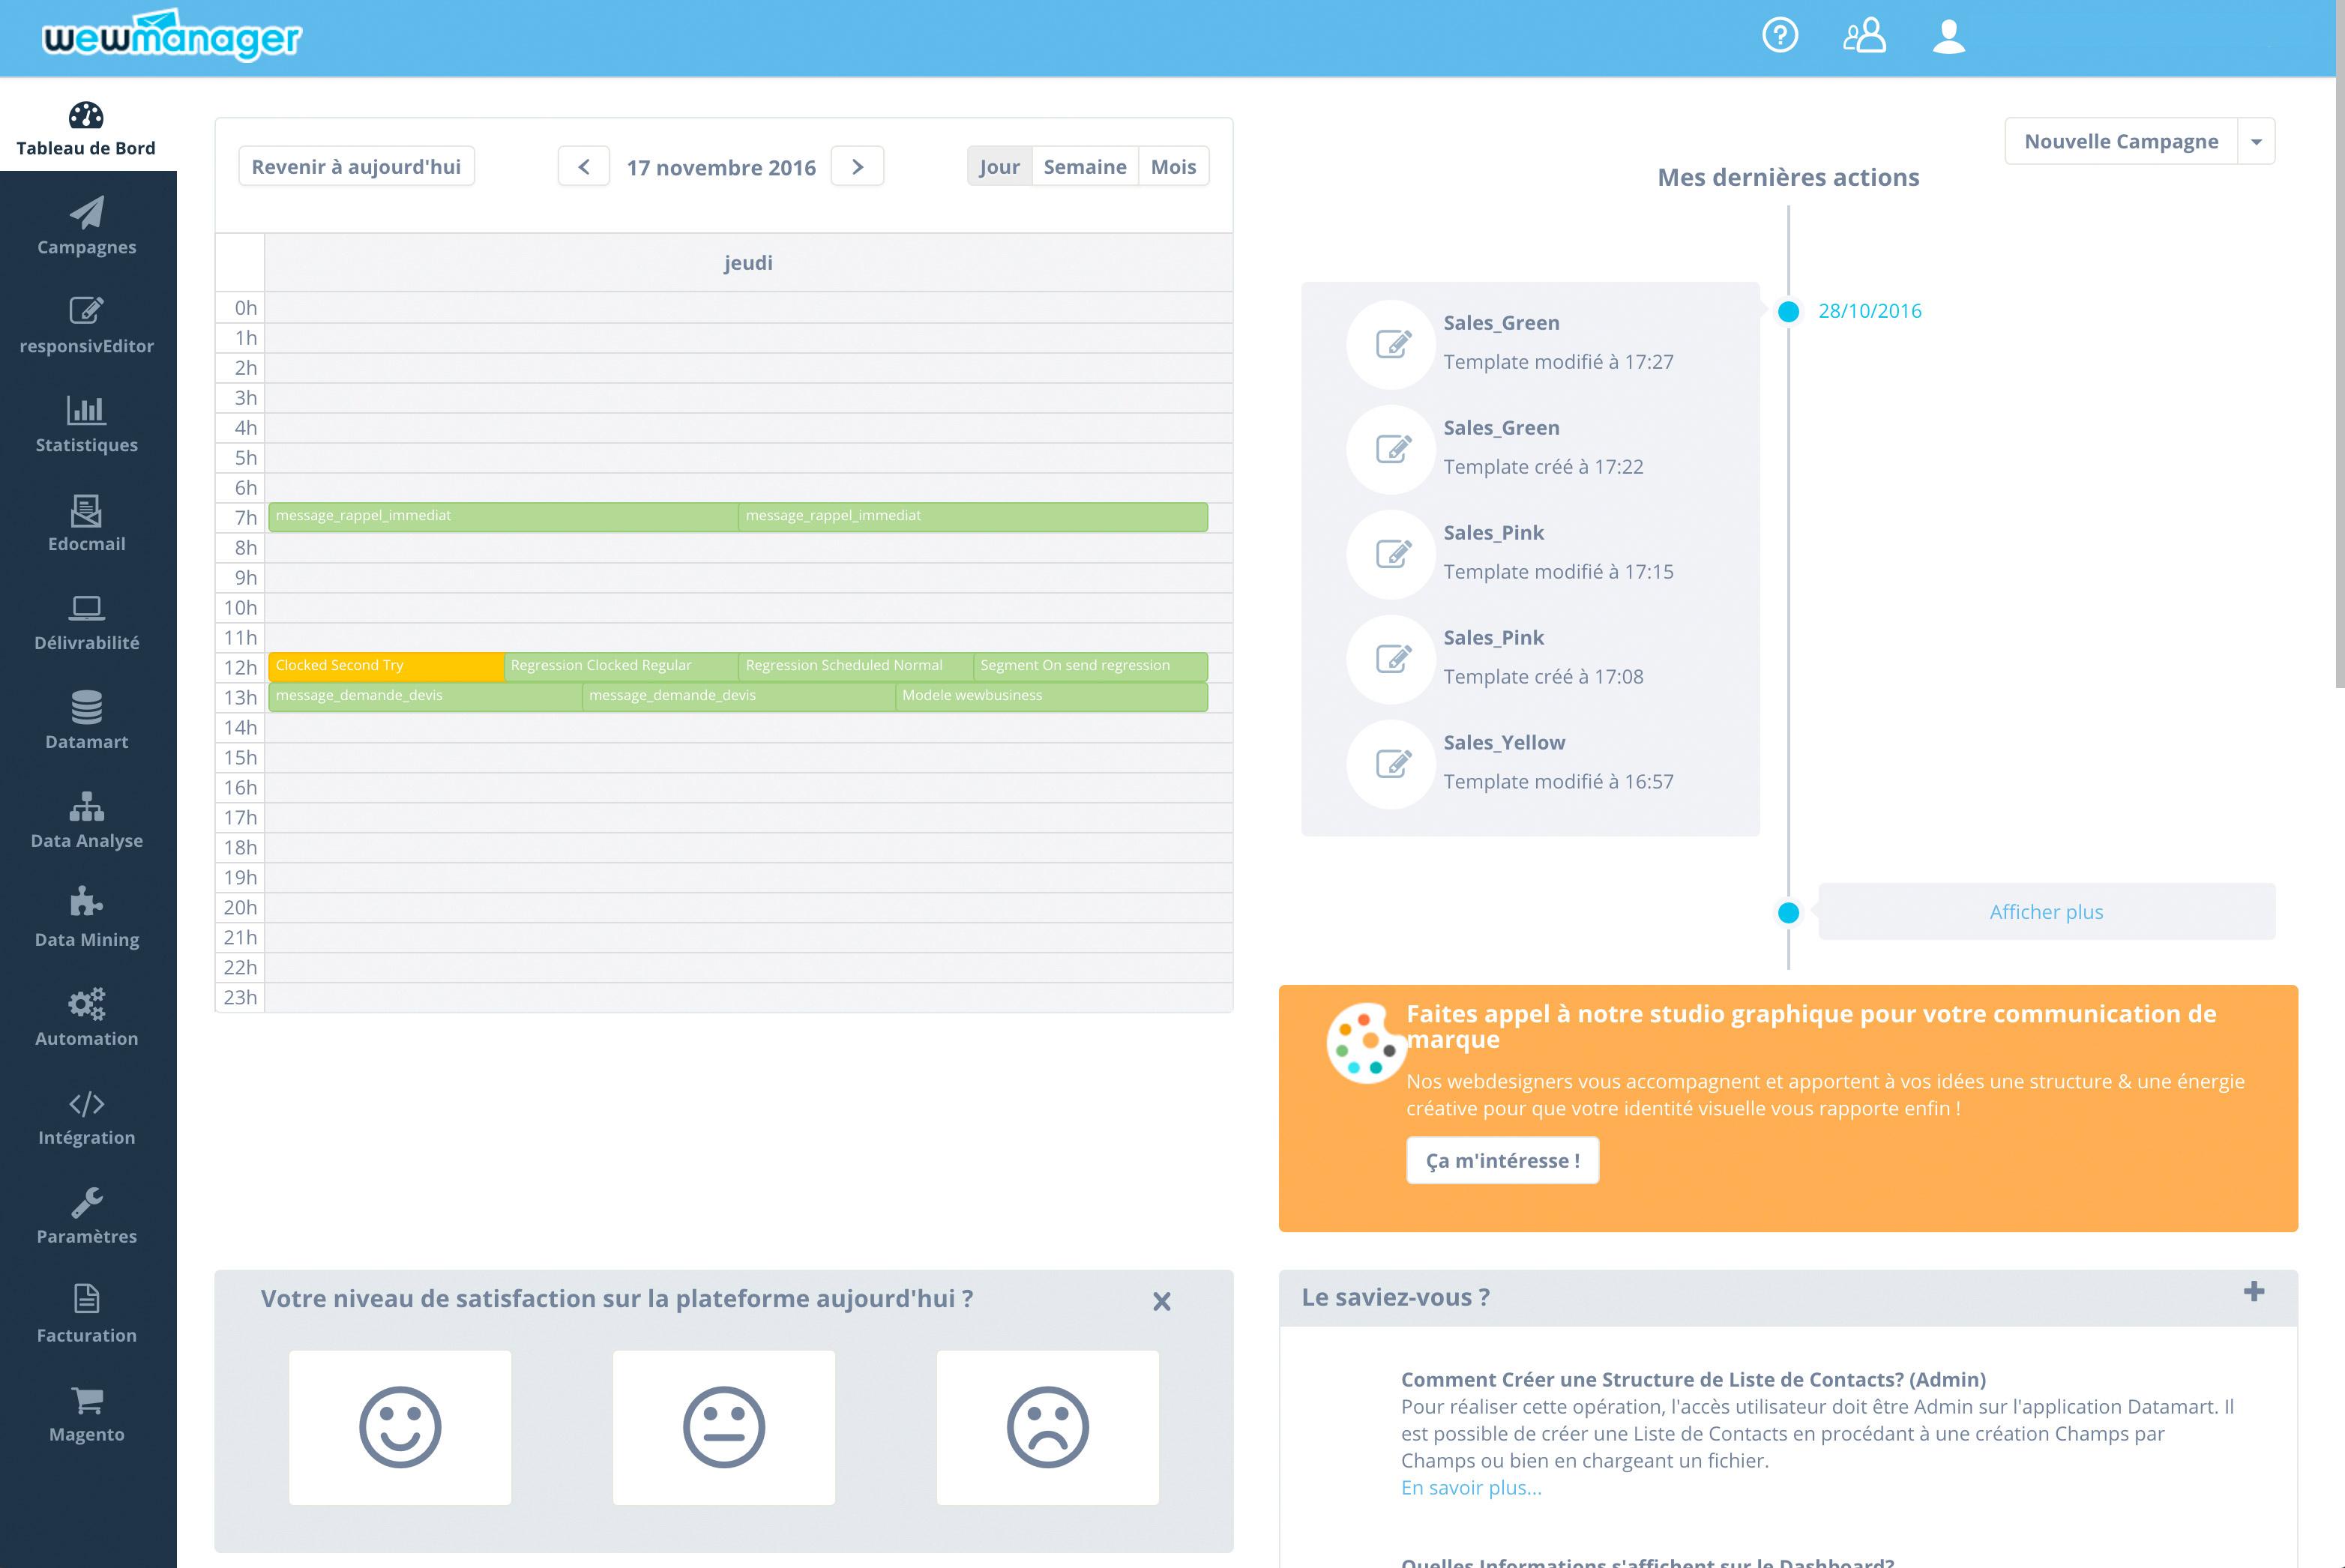 wewmanager: dashboard, track campaigns